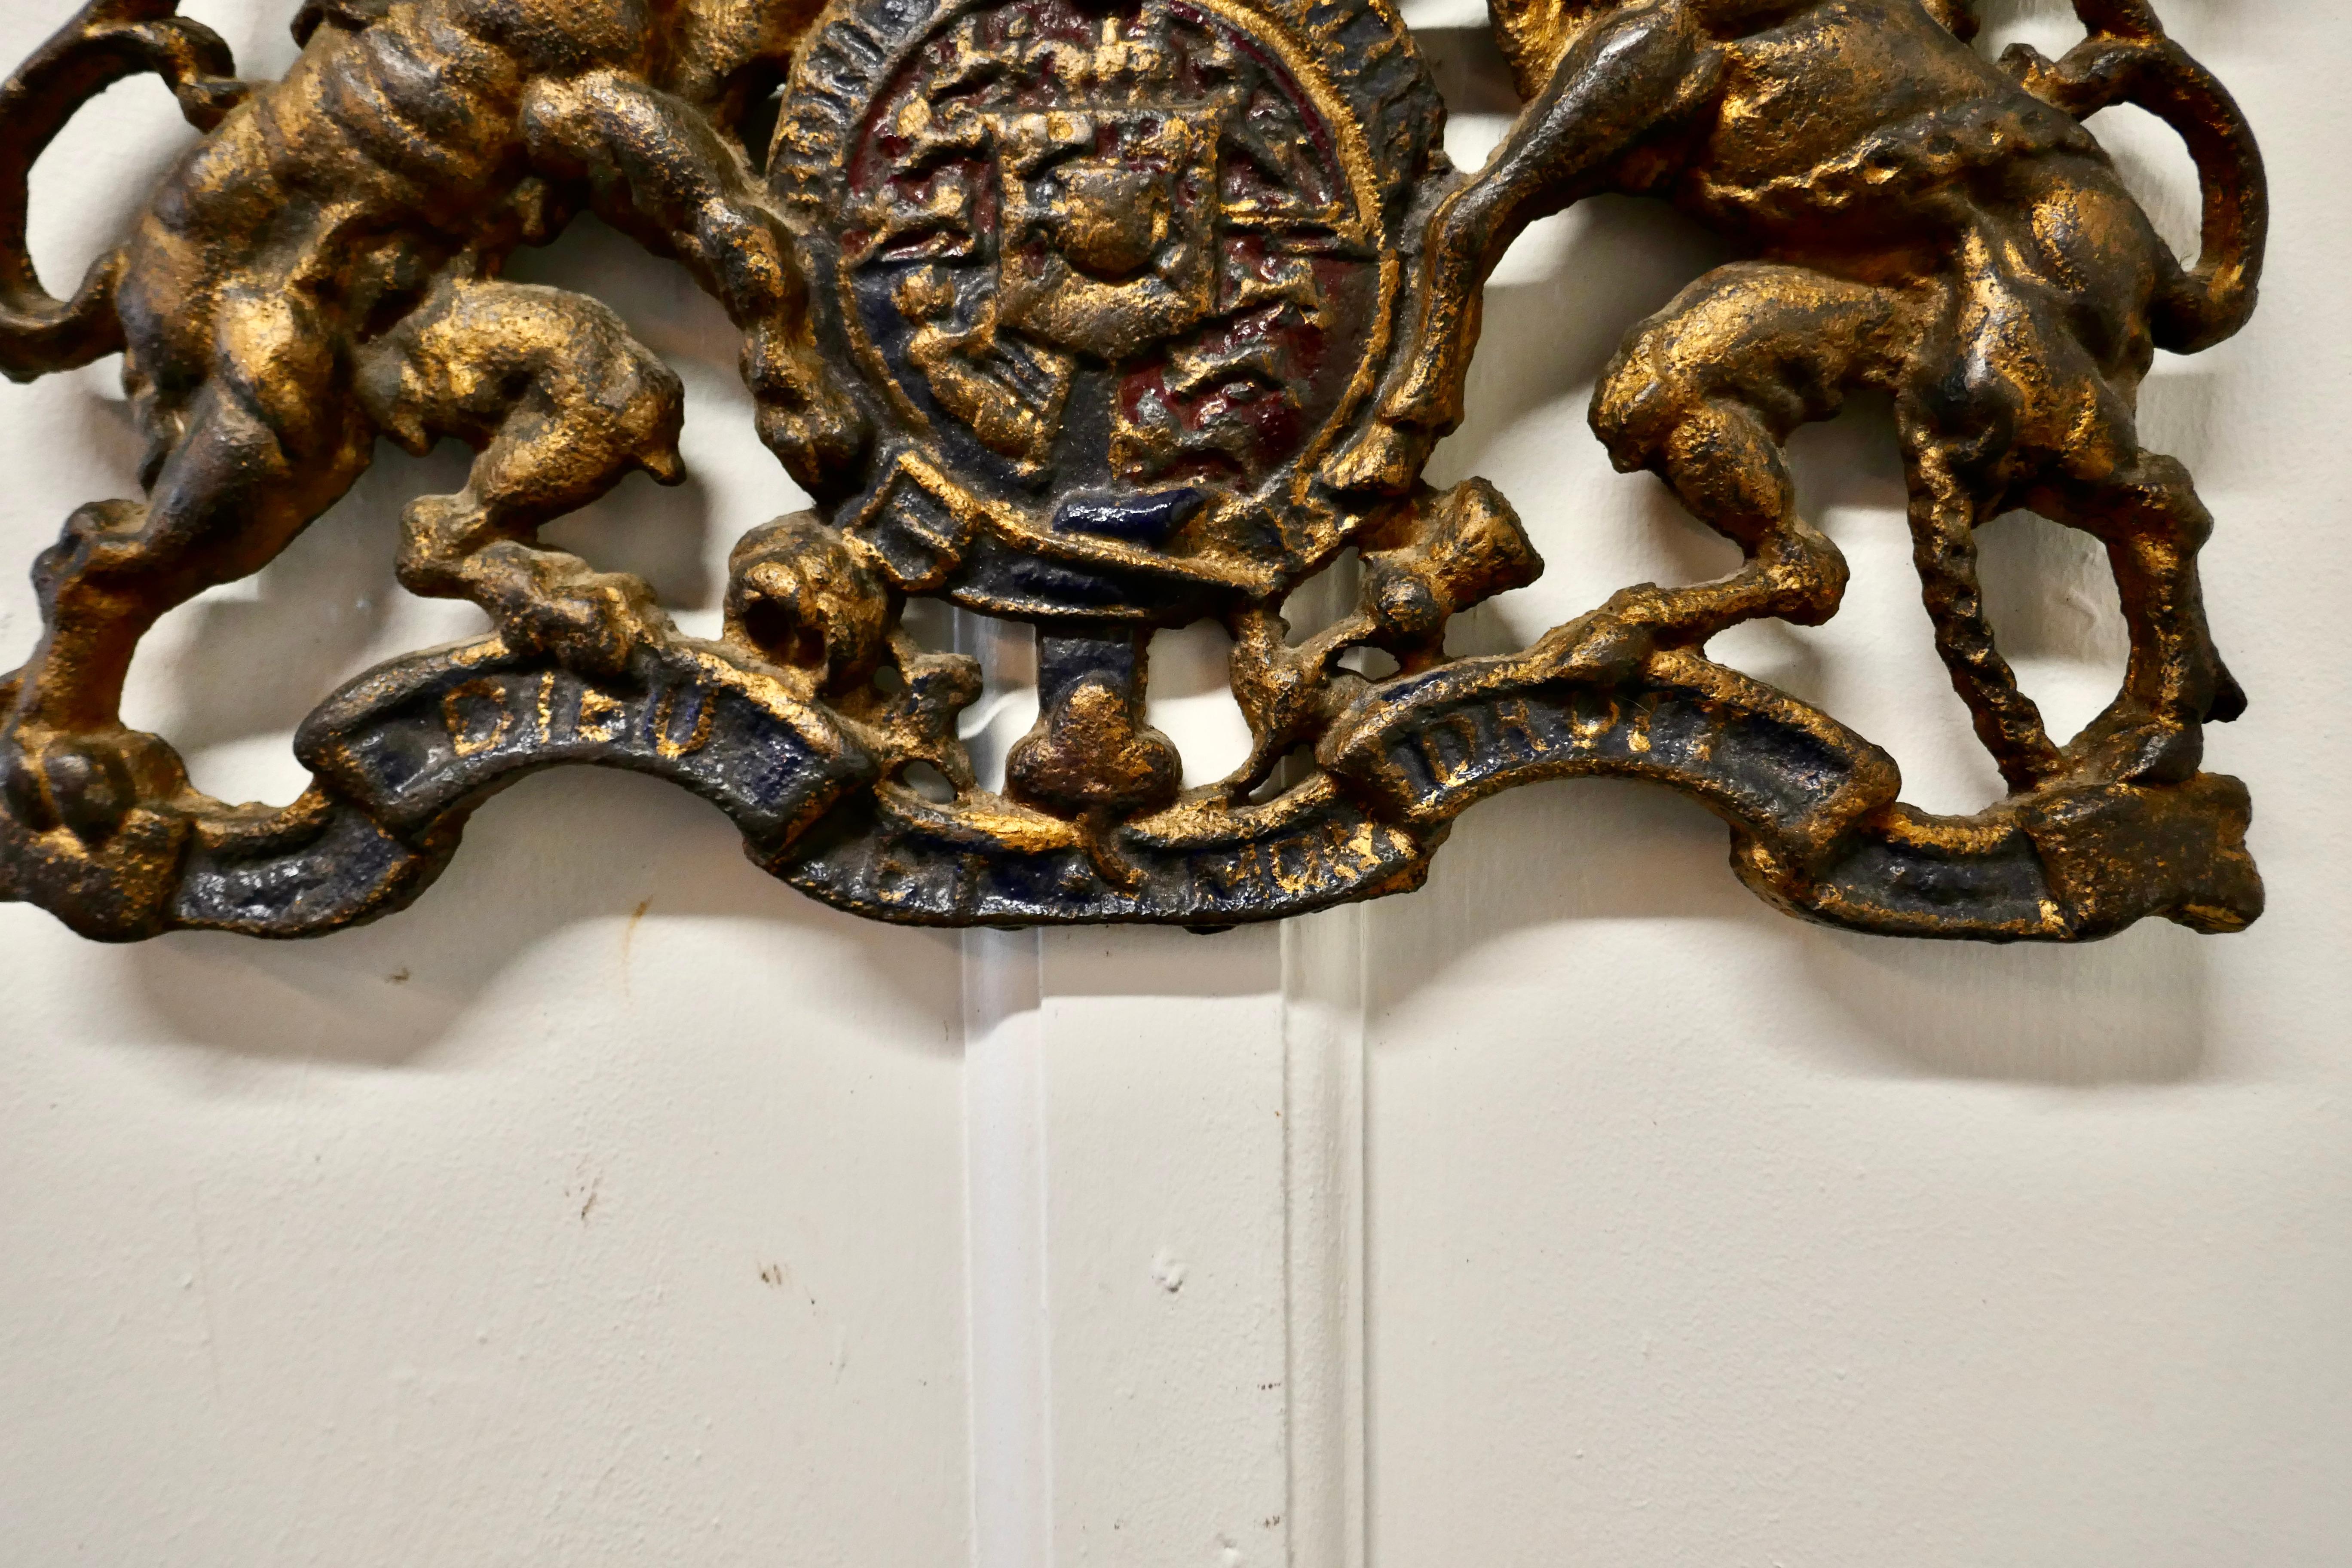 Wall hanging Victorian cast iron royal coat of arms shield plaque 

Needless to say this charming wall plaque is a very heavy piece, it was originally wall hung and has a painted finish, some of which has worn away but it still shows its majestic